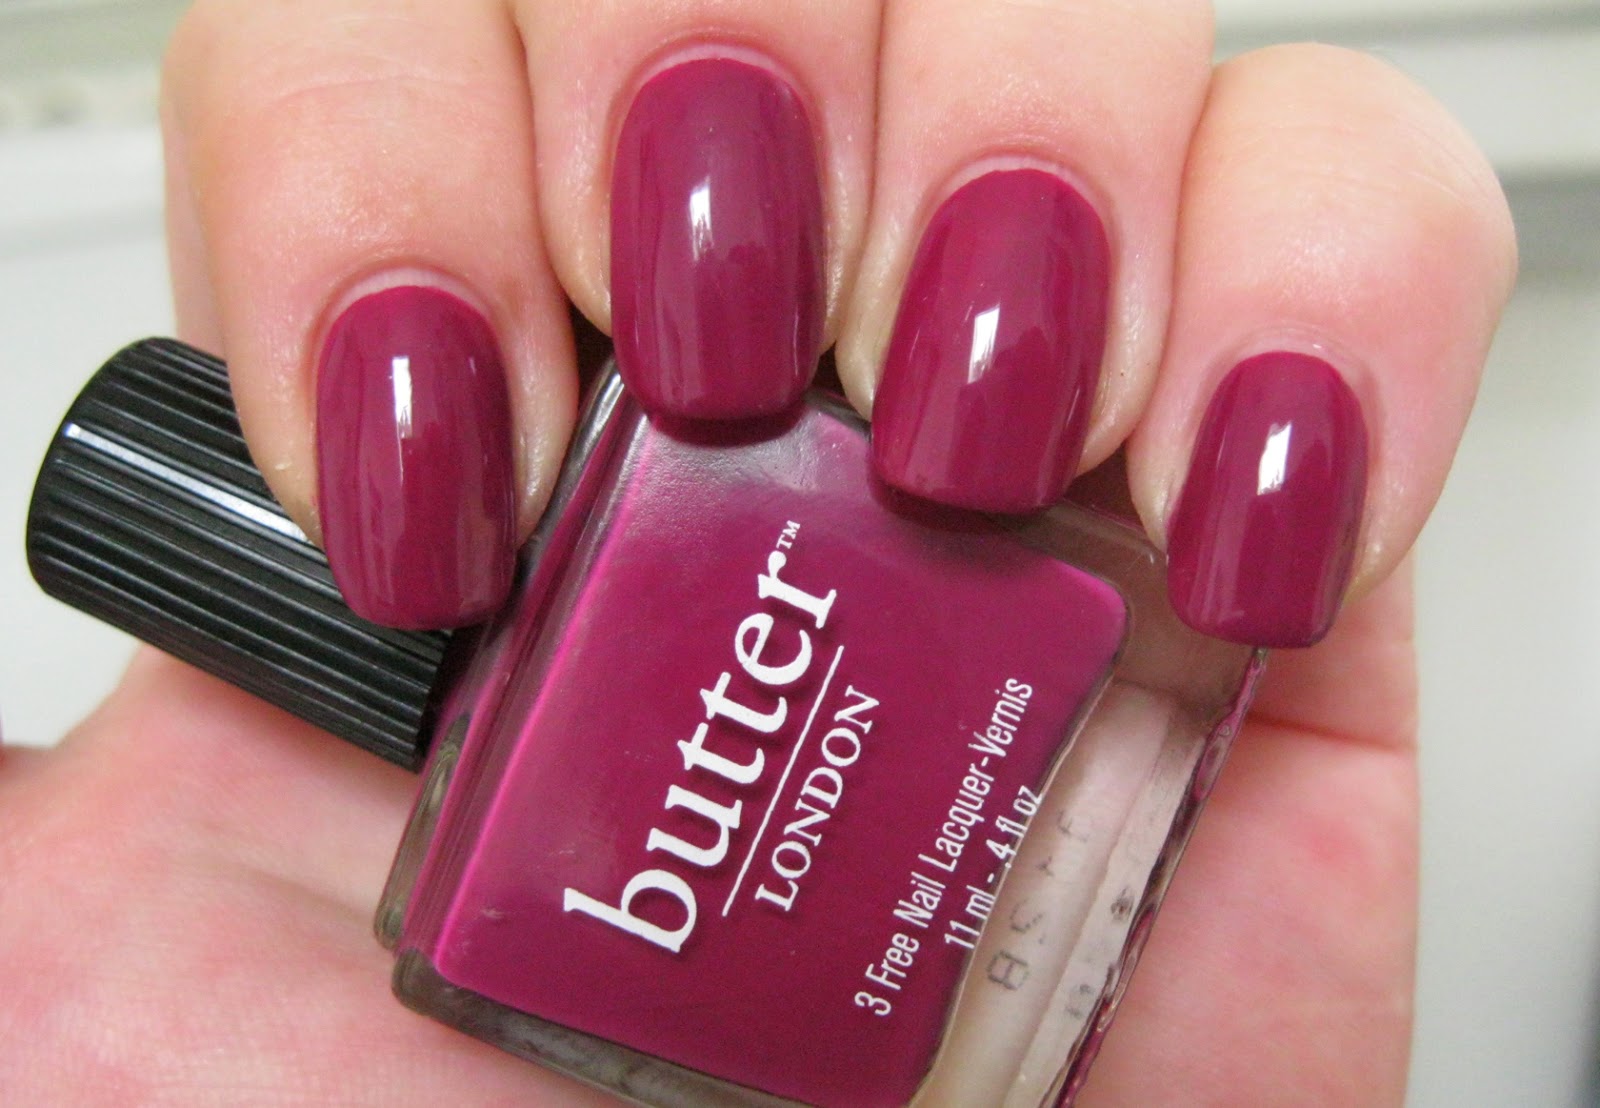 7. Butter London Nail Lacquer in "Queen Vic" - wide 6